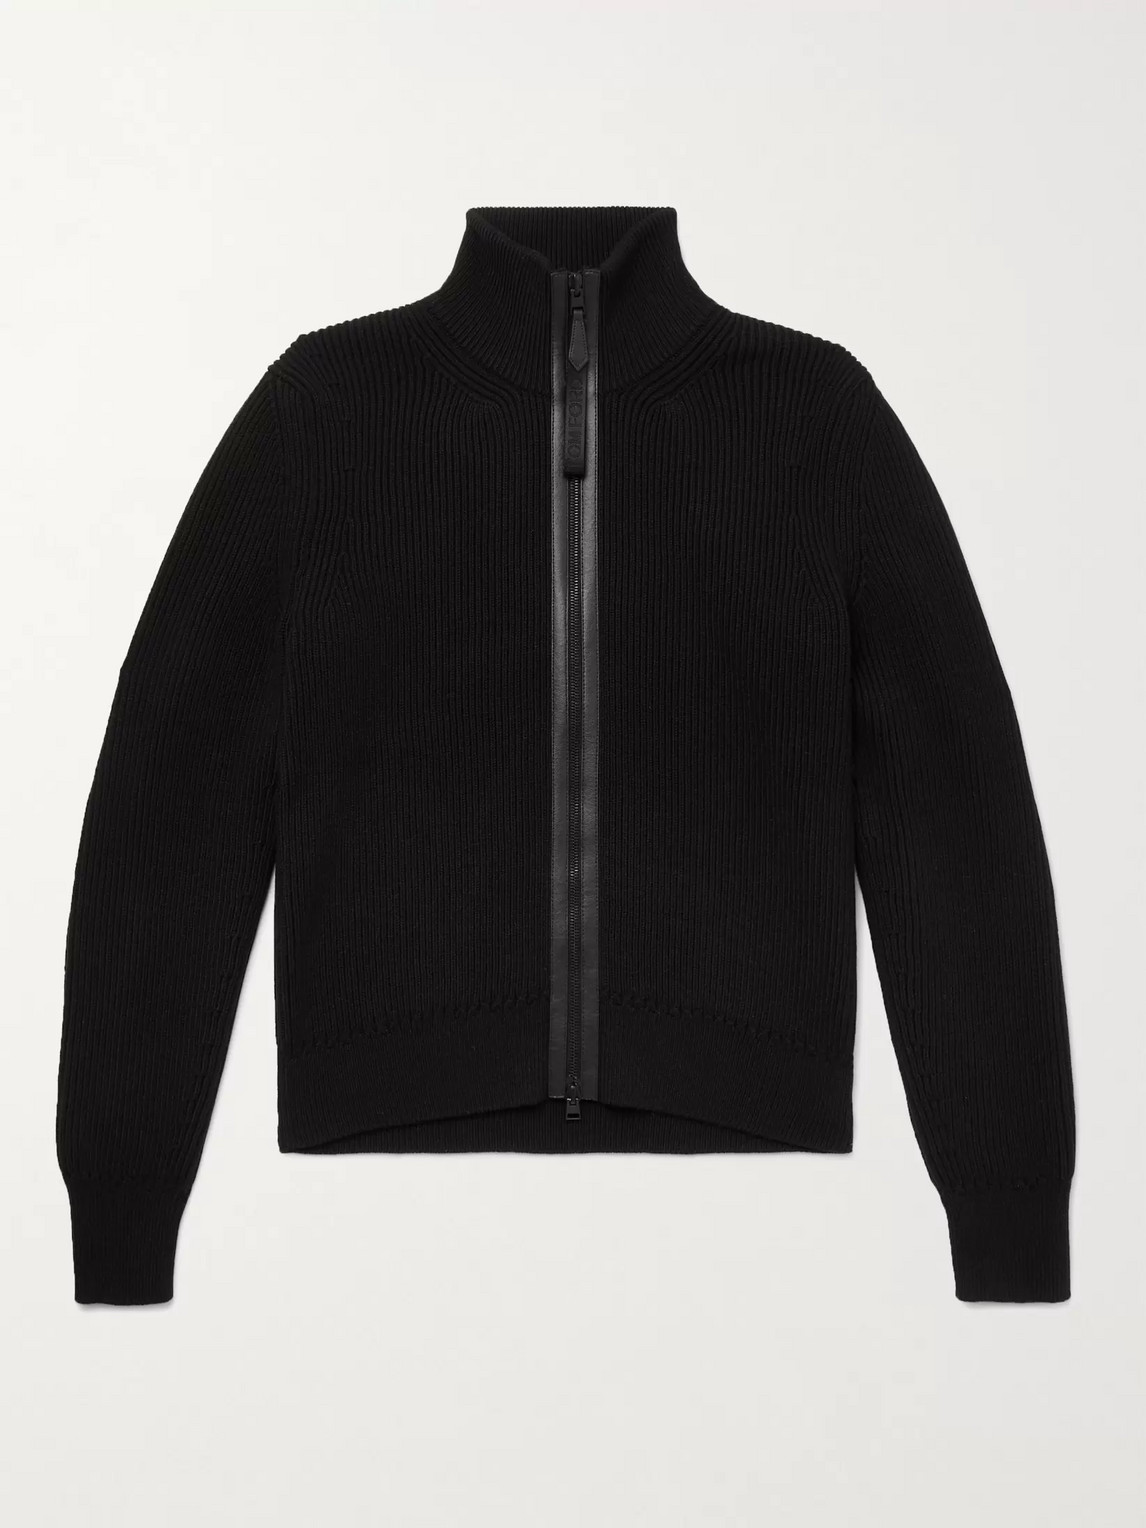 TOM FORD SLIM-FIT LEATHER-TRIMMED RIBBED WOOL AND CASHMERE-BLEND ZIP-UP CARDIGAN